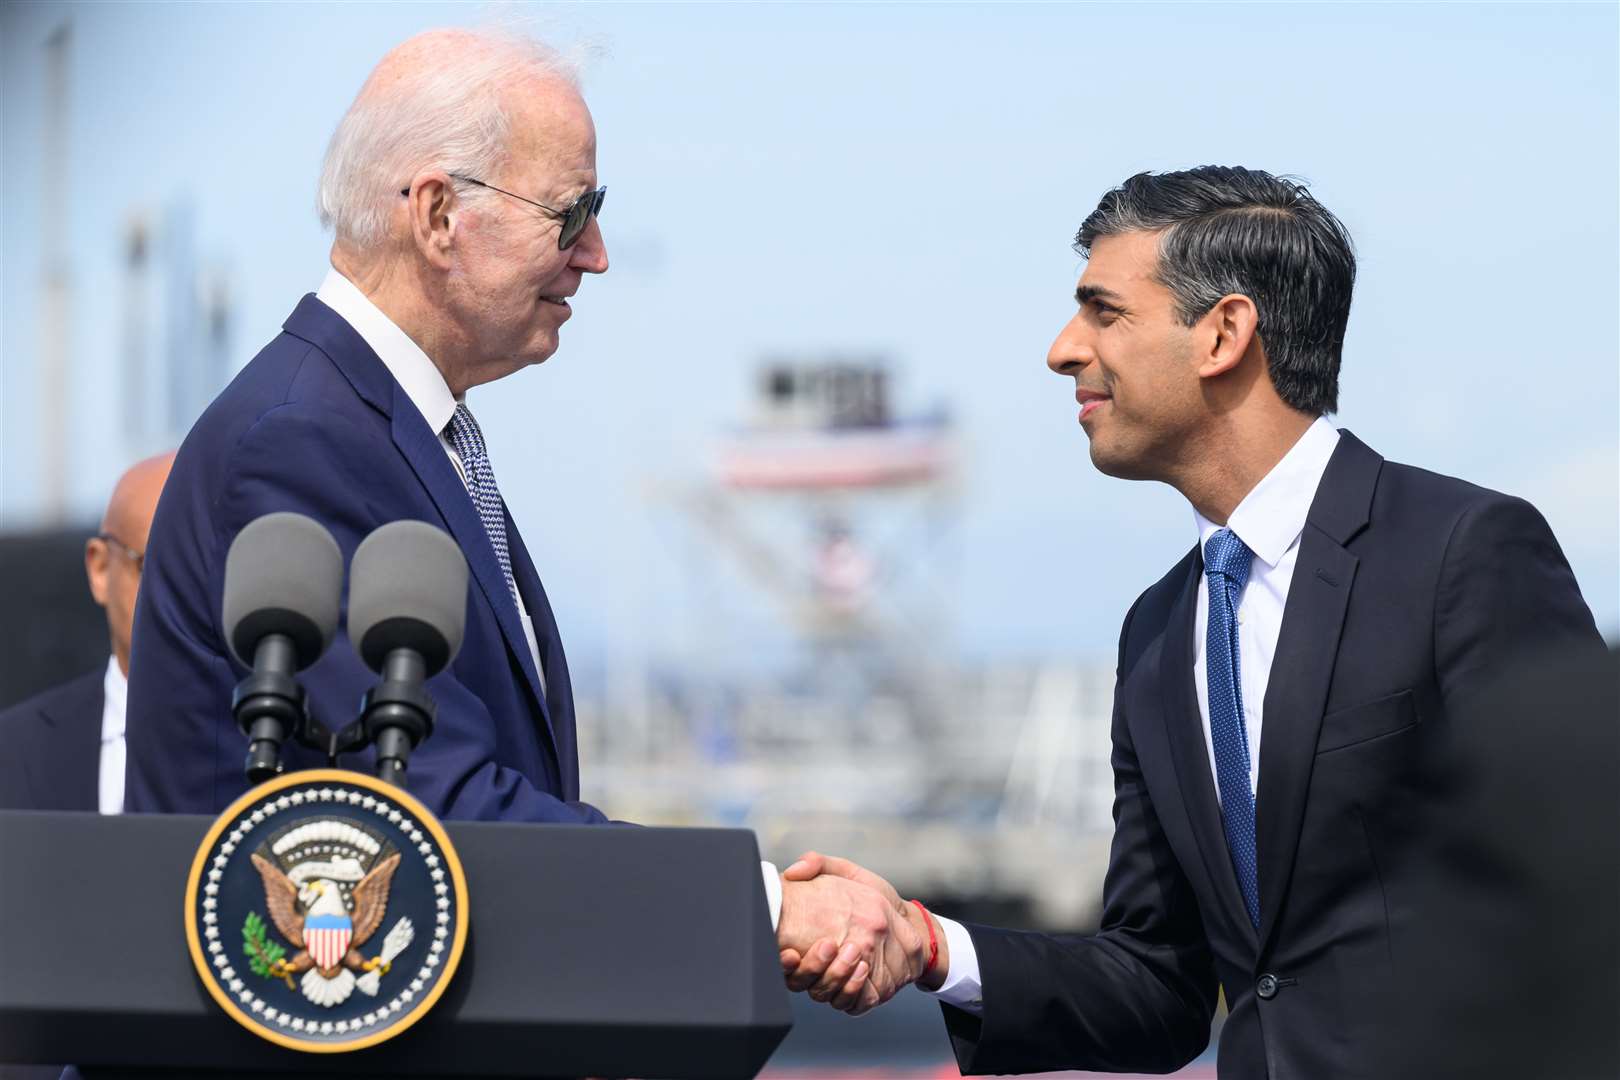 Prime Minister Rishi Sunak shakes hands with US President Joe Biden during a press conference in San Diego (Leon Neal/PA)